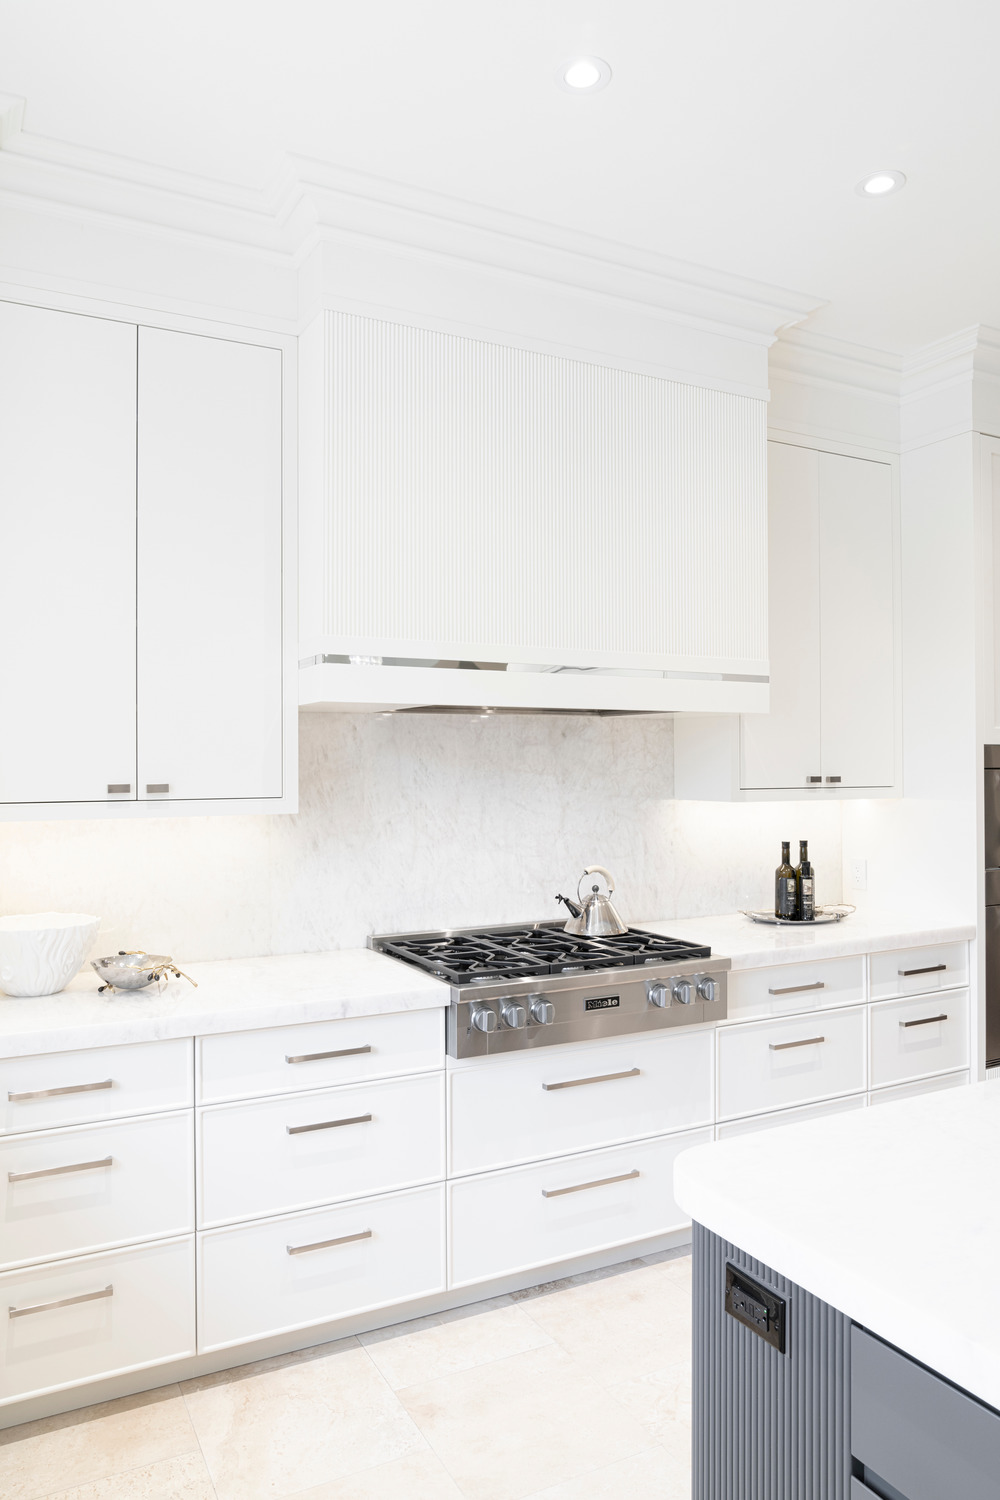 Cameo Kitchens and Fine Cabinetry transforms a simple kitchen into a signature design statement